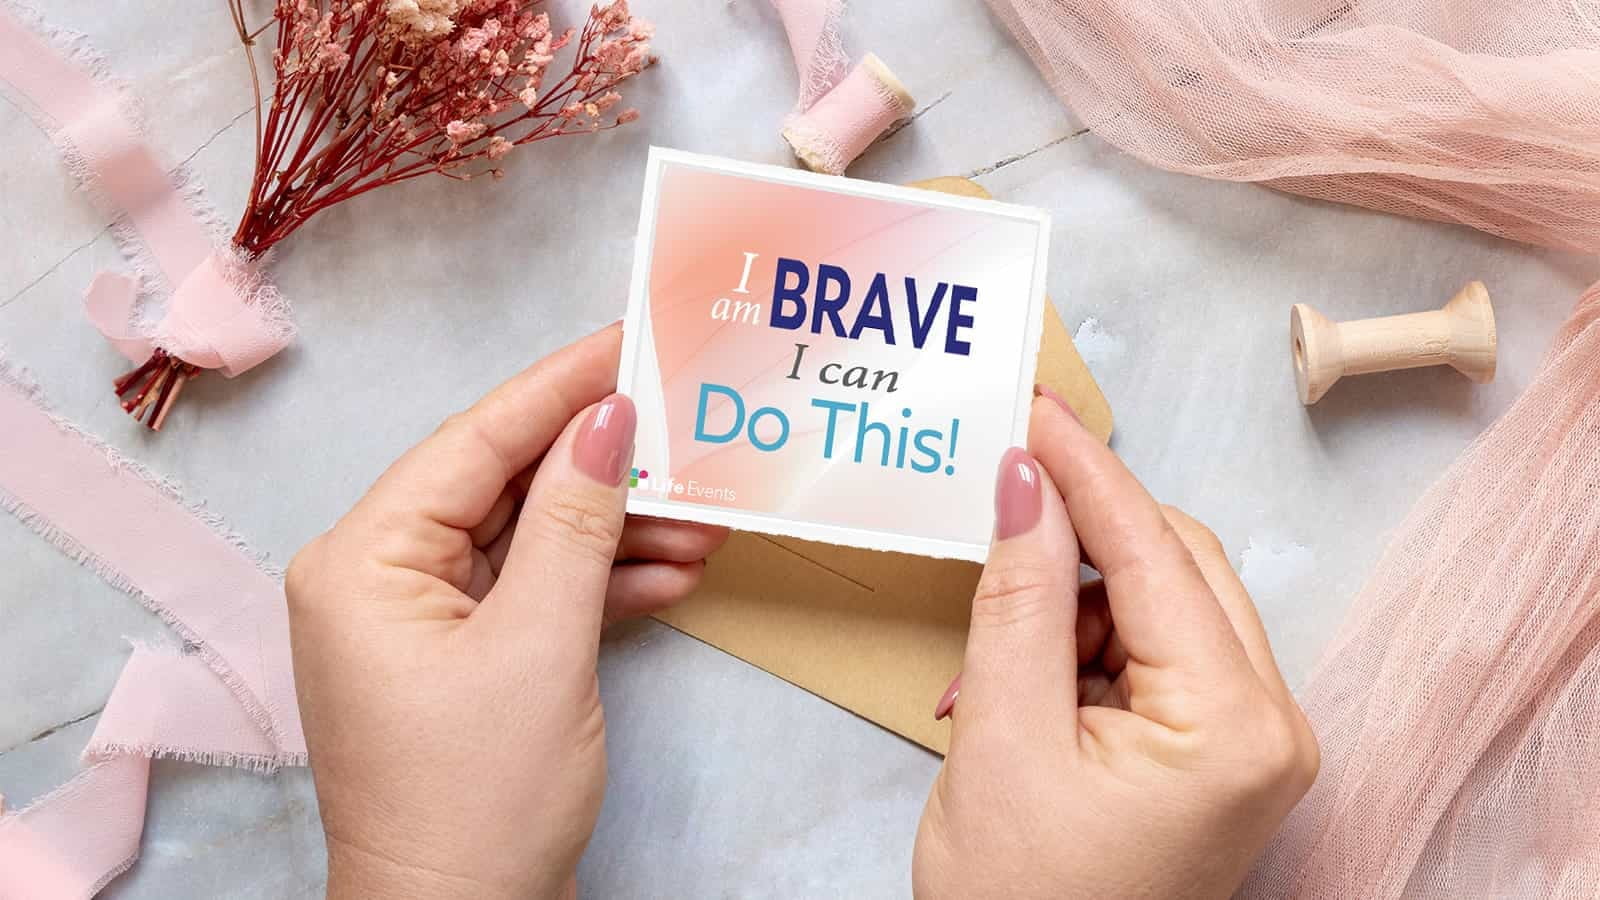 Positive Affirmation: I am brave. I can do this!